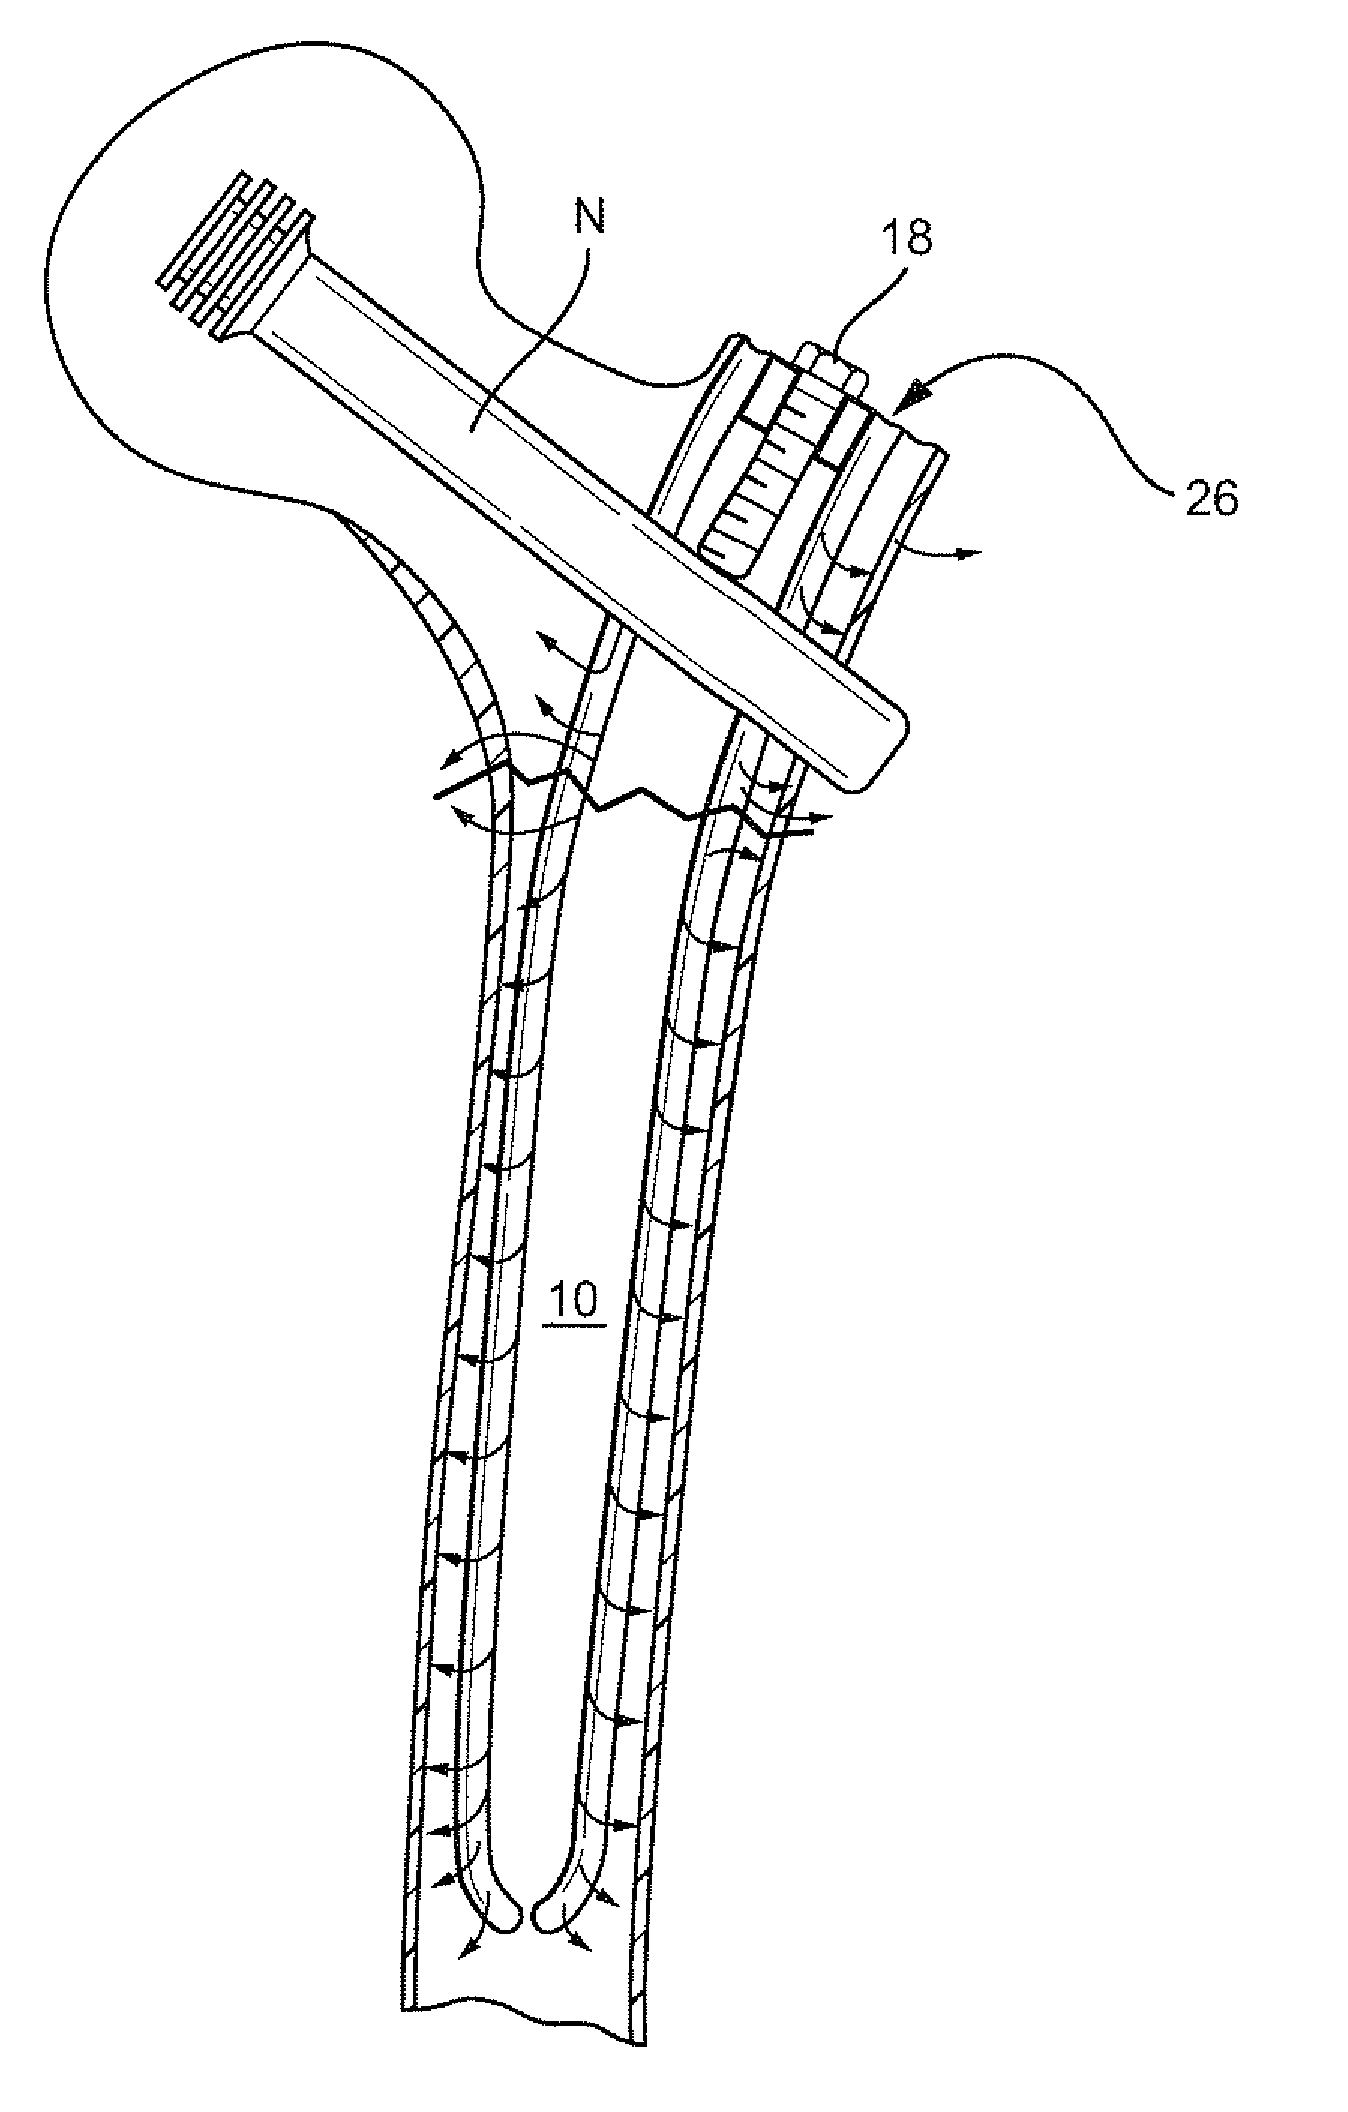 Biologic intramedullary fixation device and methods of use